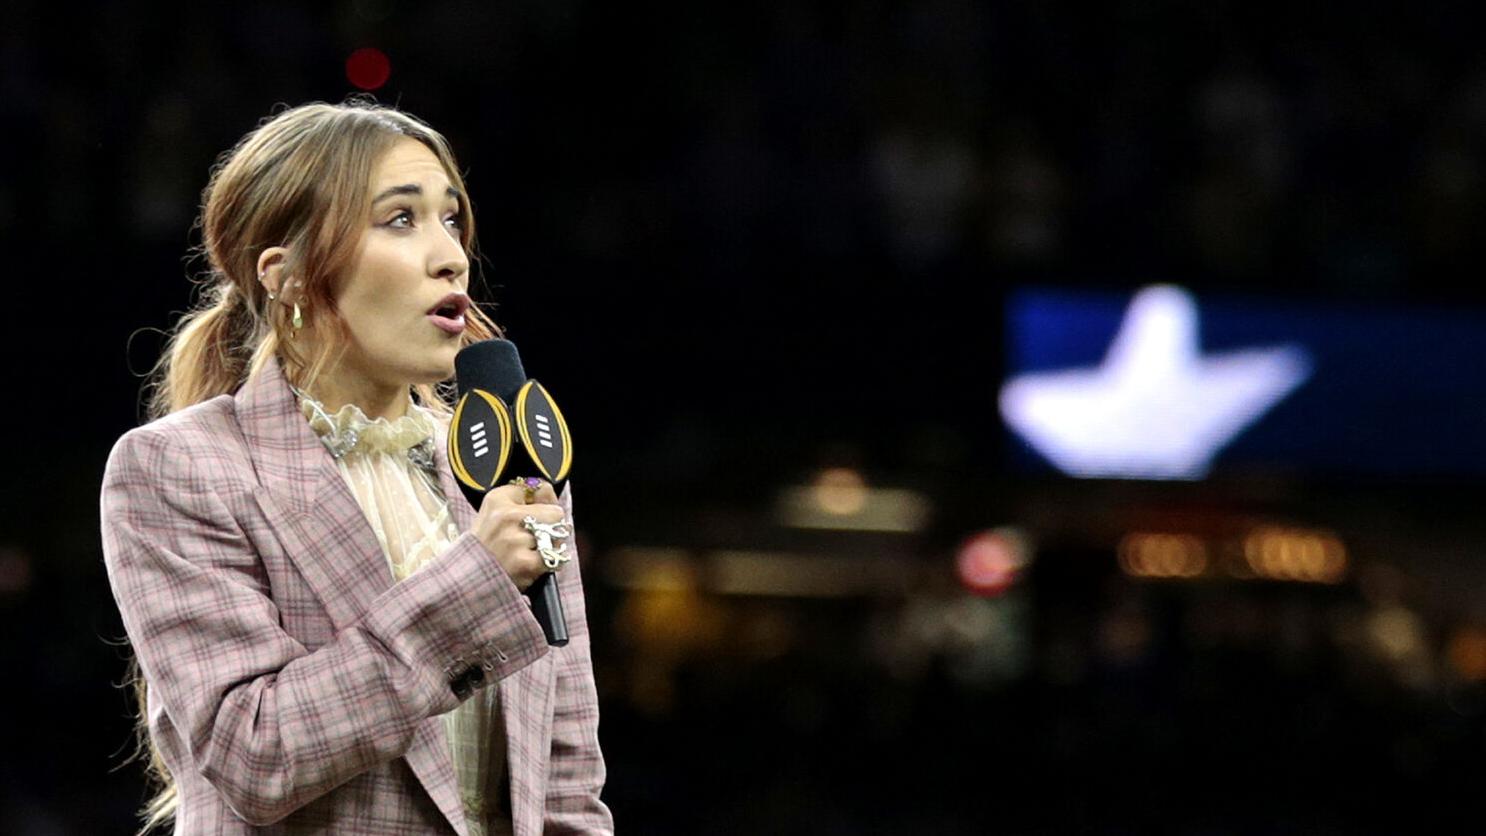 Lauren Daigle Says She is ‘Saddened by Divisive Agendas’ After Being Cut from “Dick Clark’s New Year’s Rockin’ Eve” Broadcast